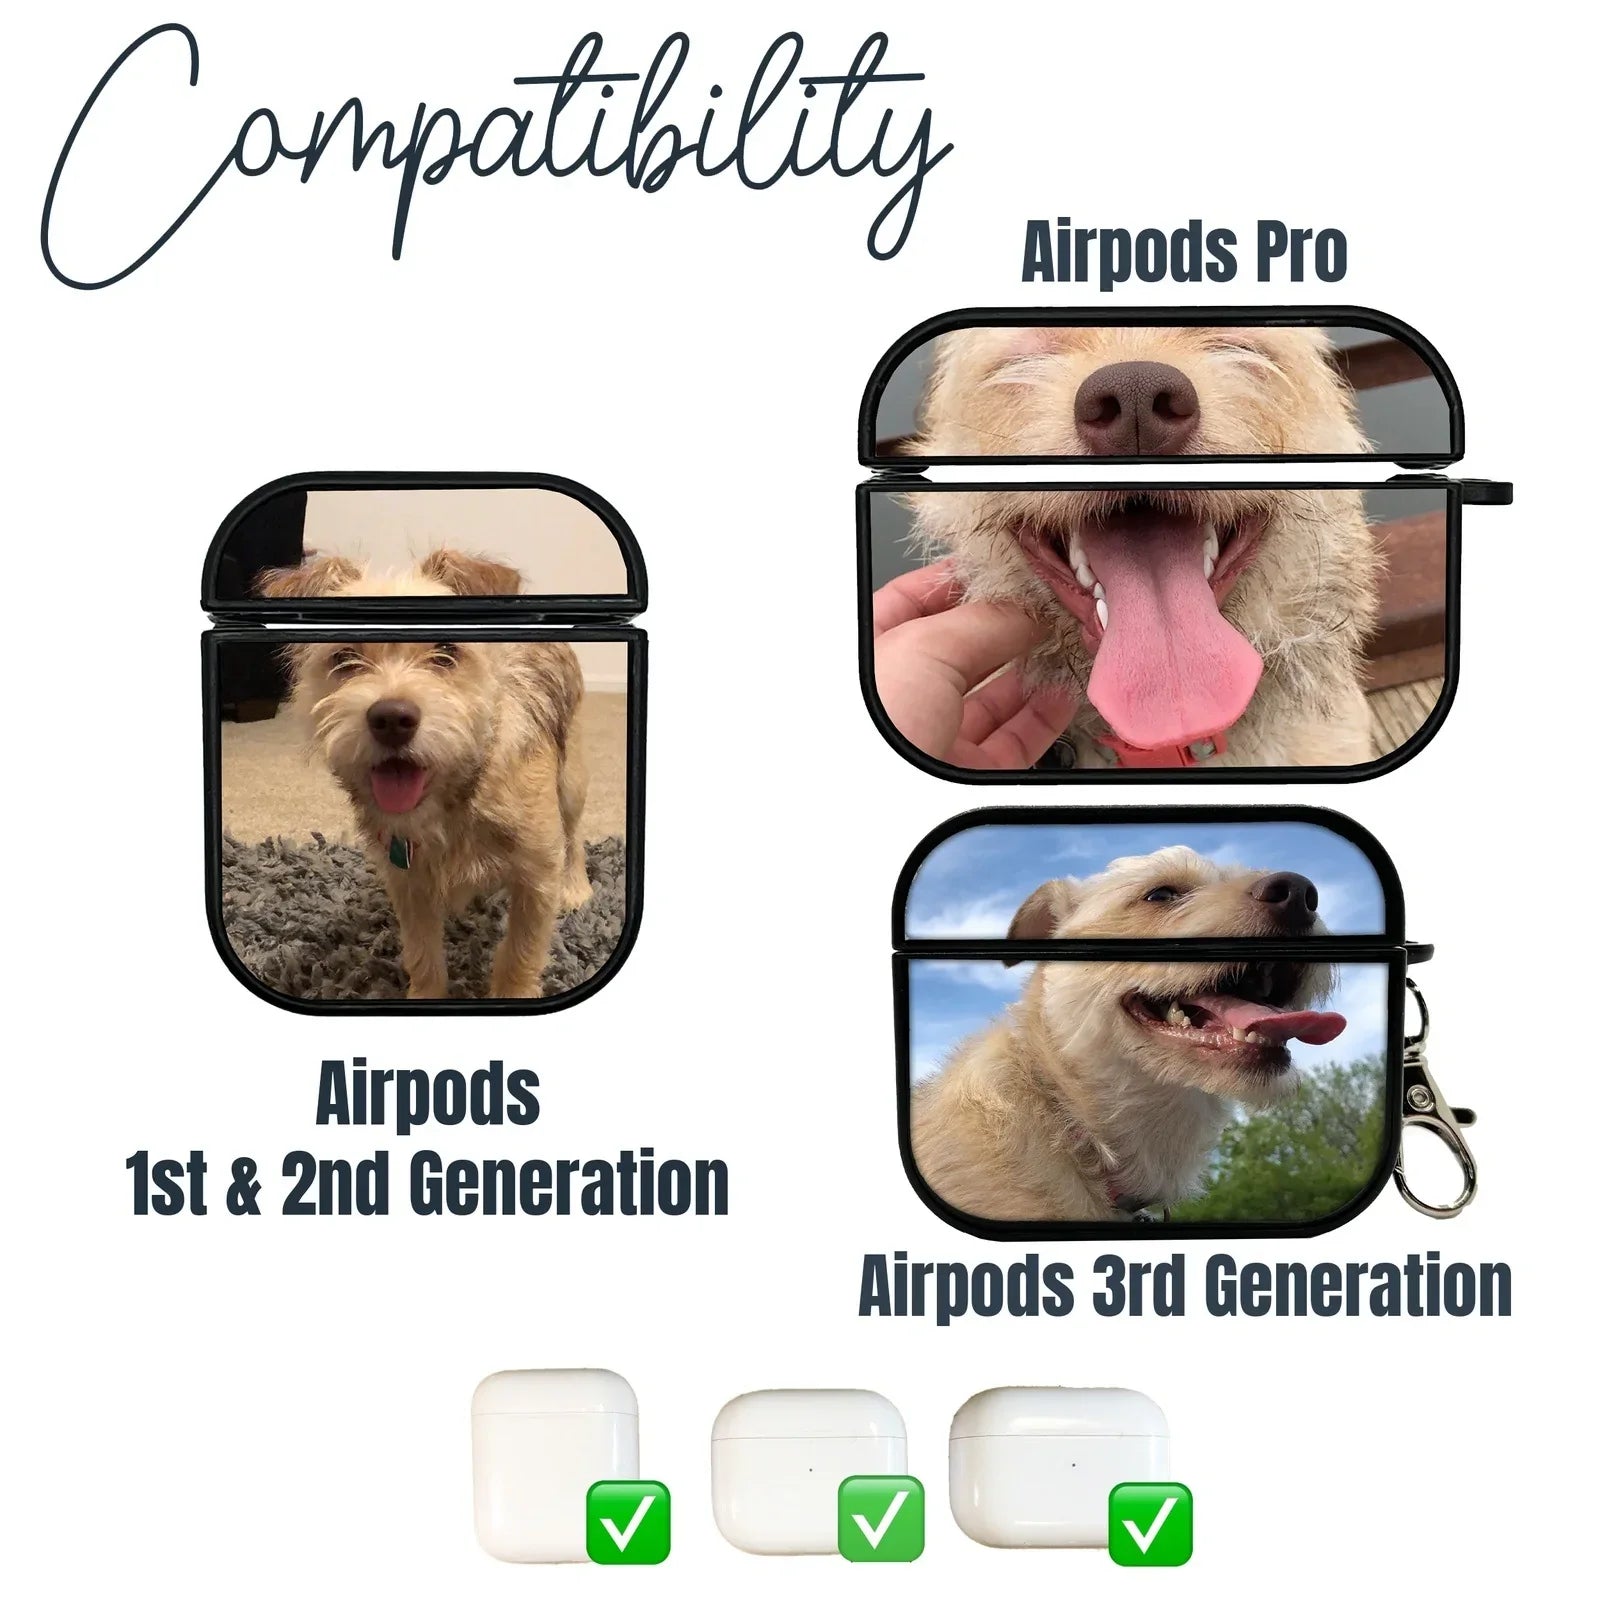 Personalized Dog Photo Airpods Case for Generation 1, 2, 3 or Airpods Pro Generation 1 and 2